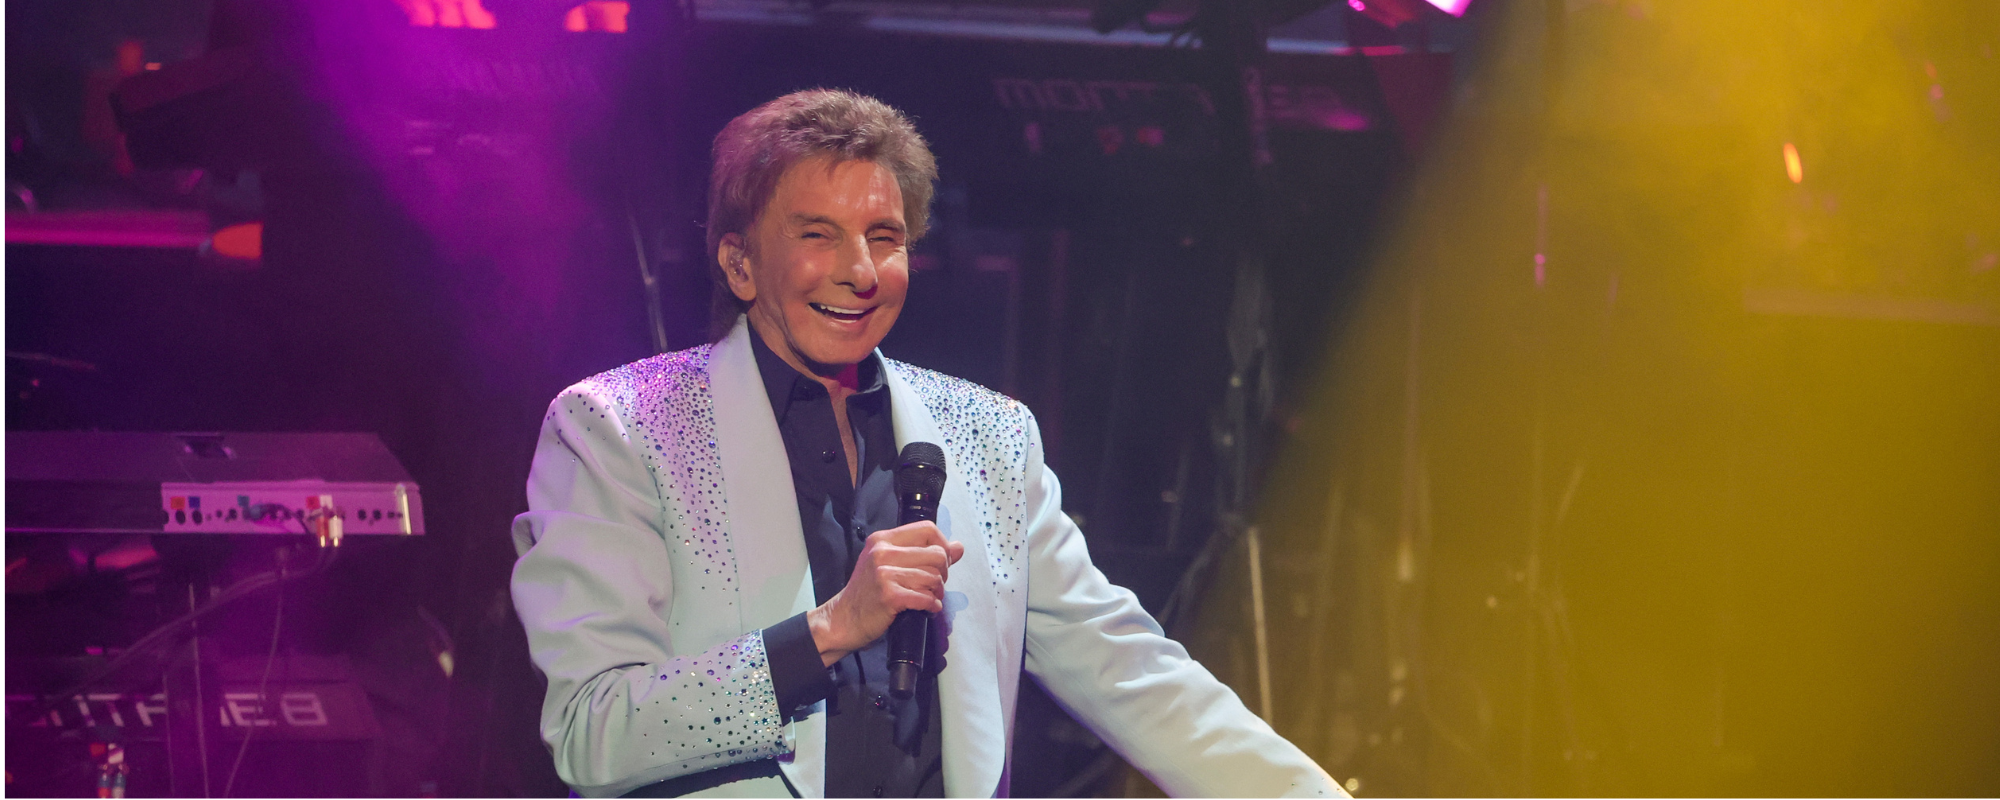 Barry Manilow’s Last U.K. Shows: Dates, Tickets, and More